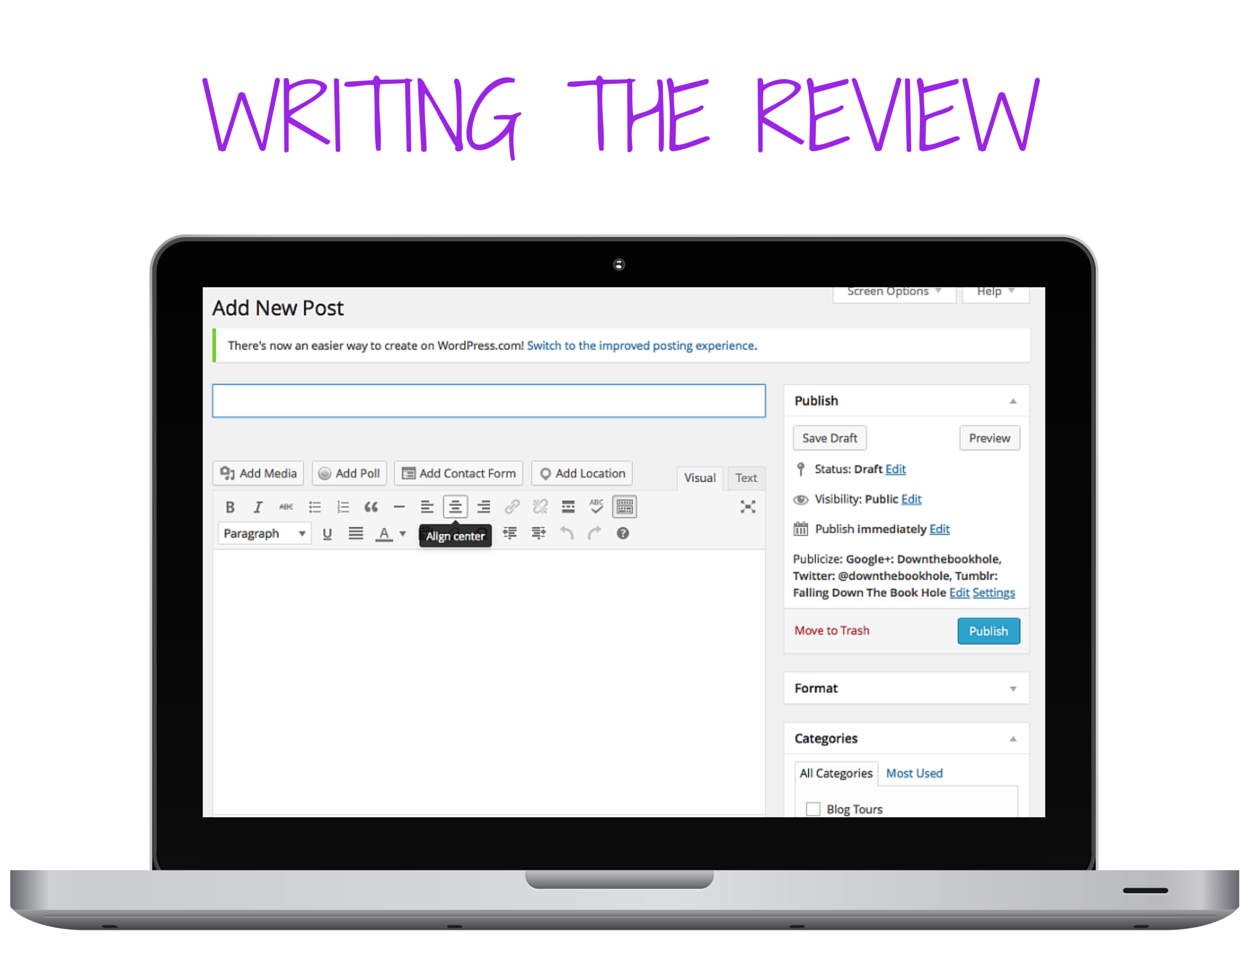 WRITING THE REVIEW